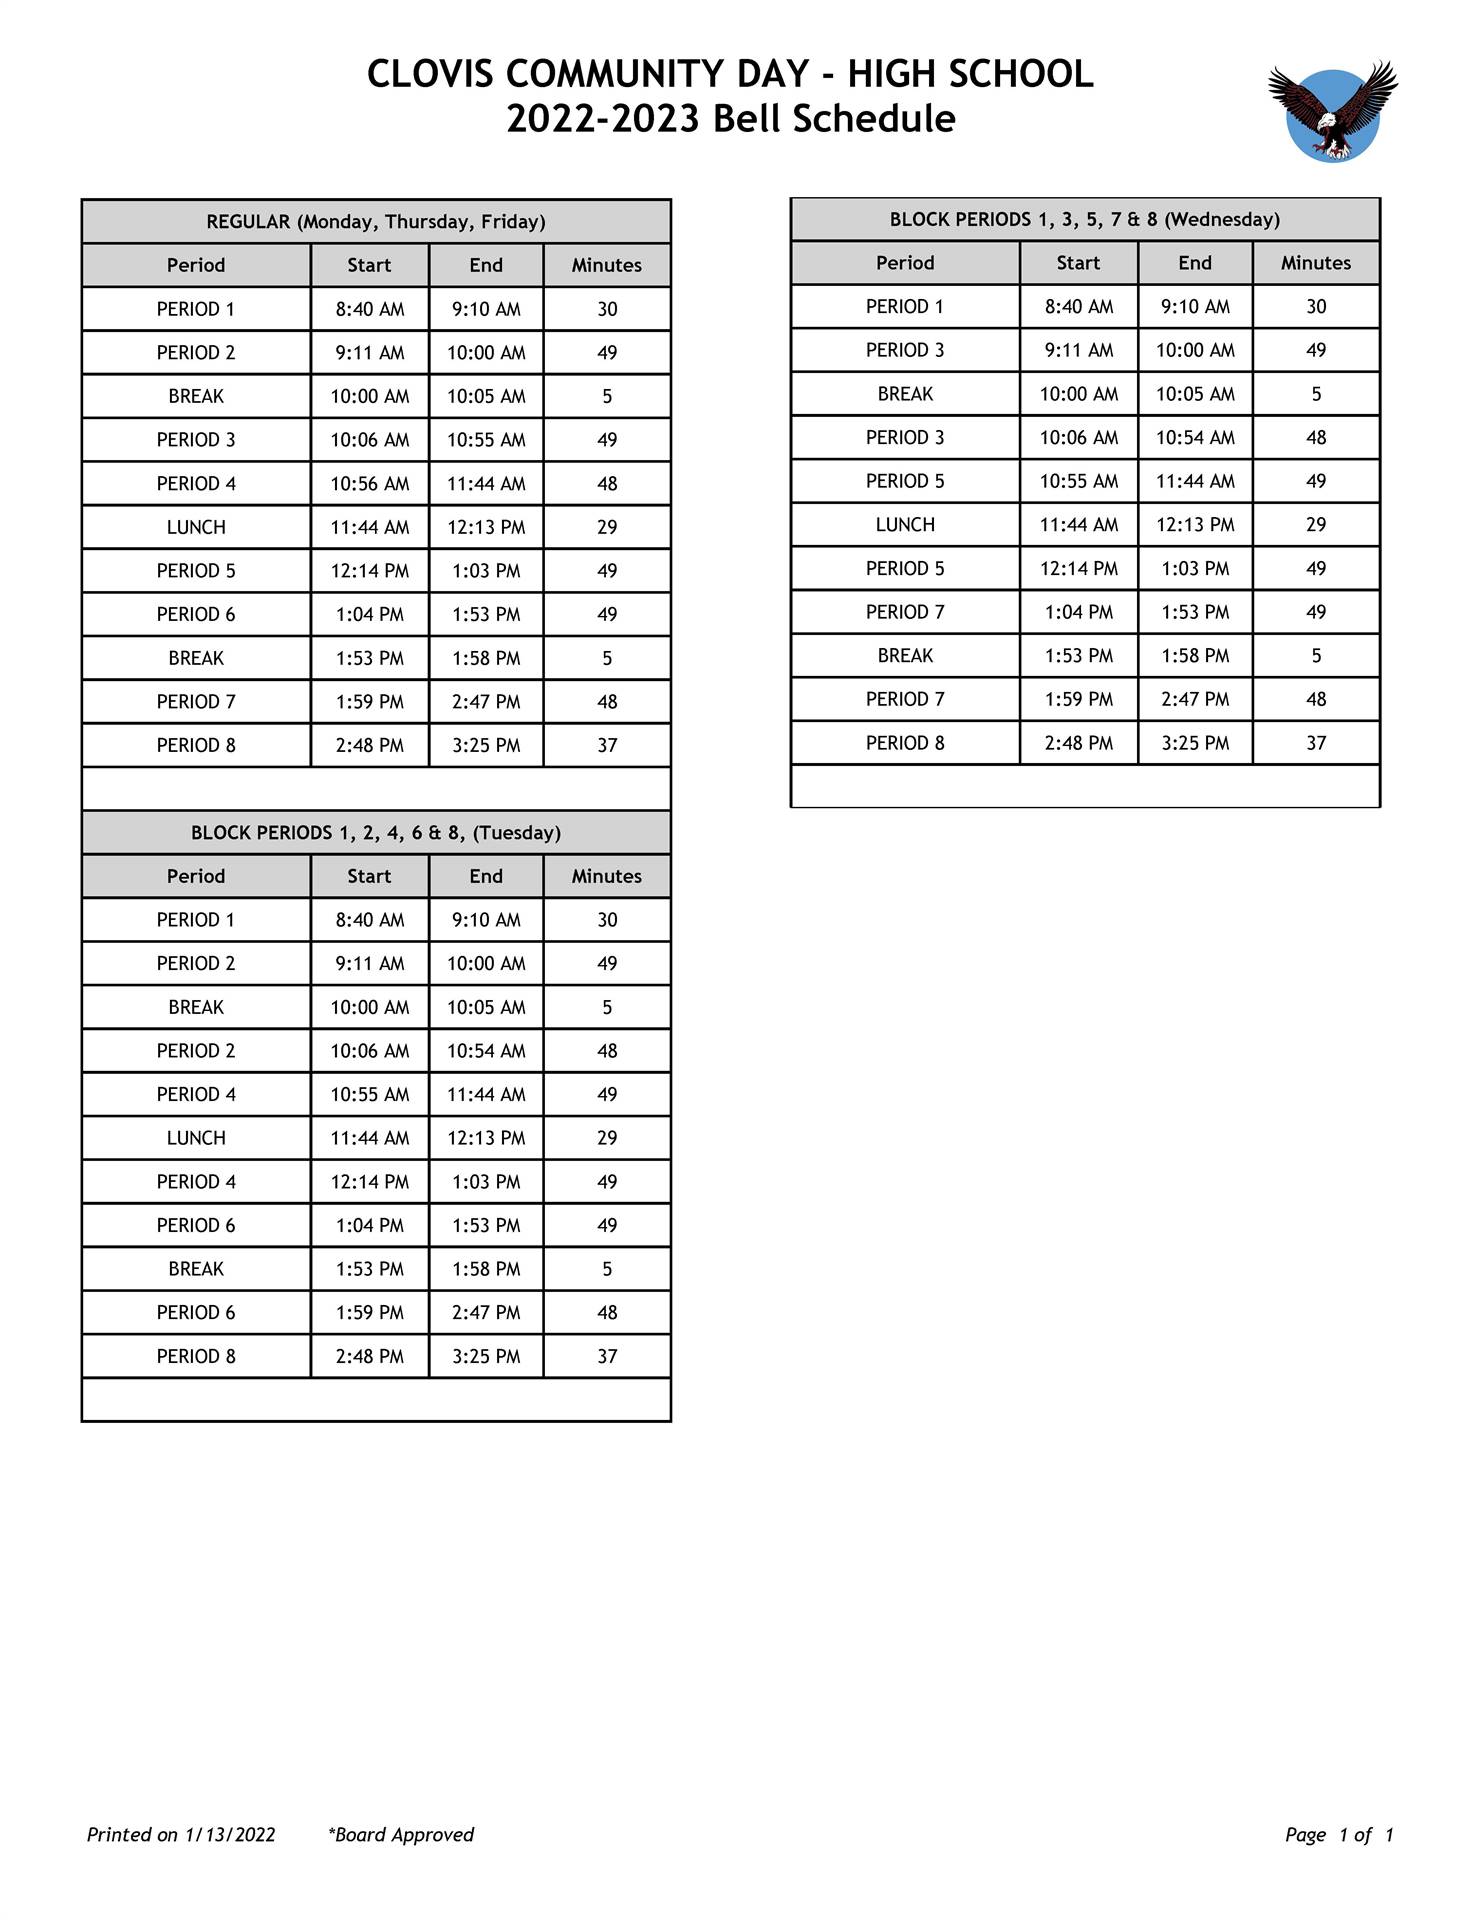 Ed Services Area Bell Schedule - full text downloadable below